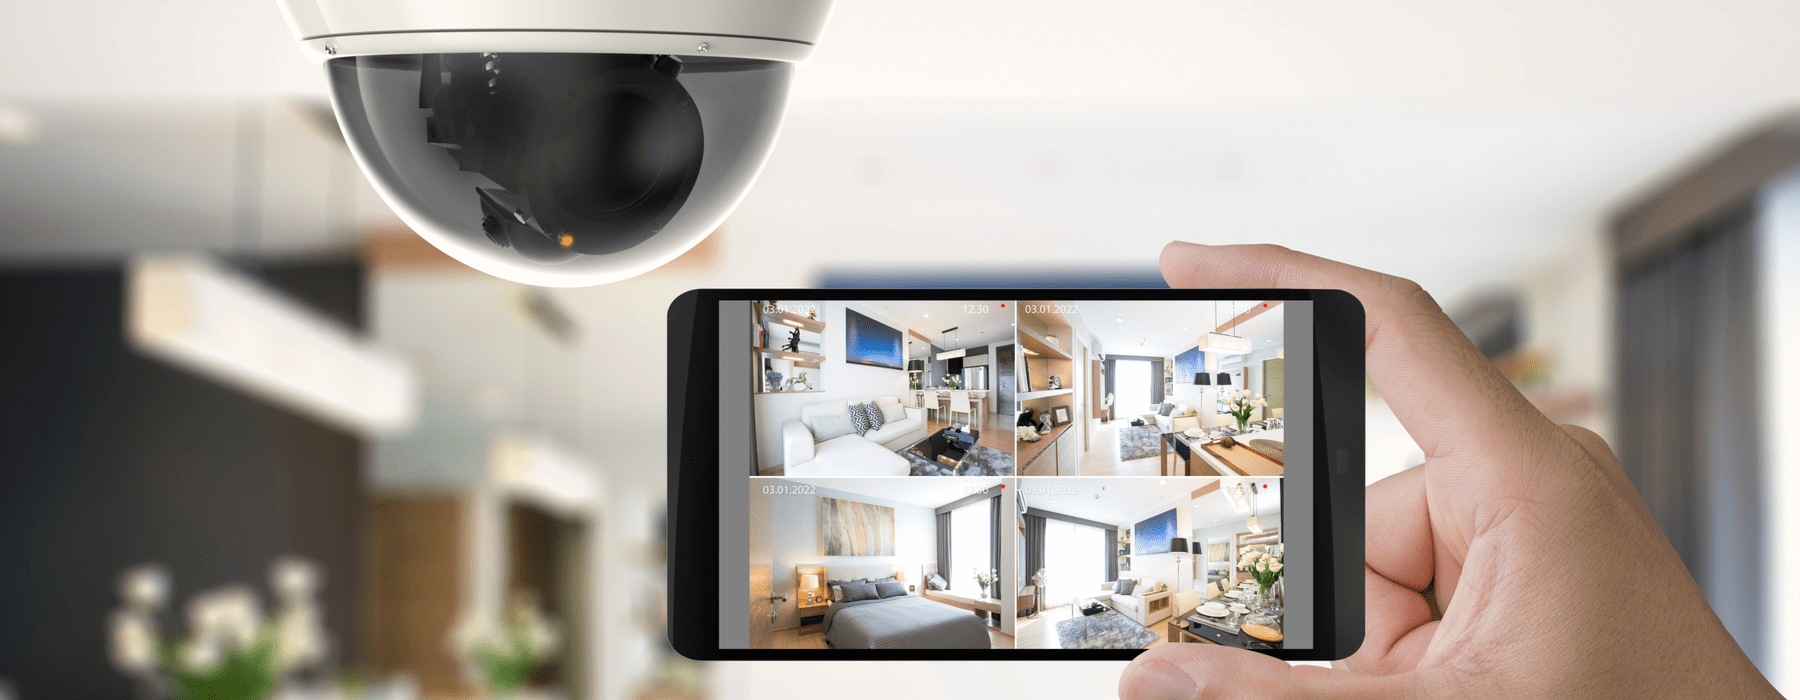 4 Important Benefits of Home Security Cameras